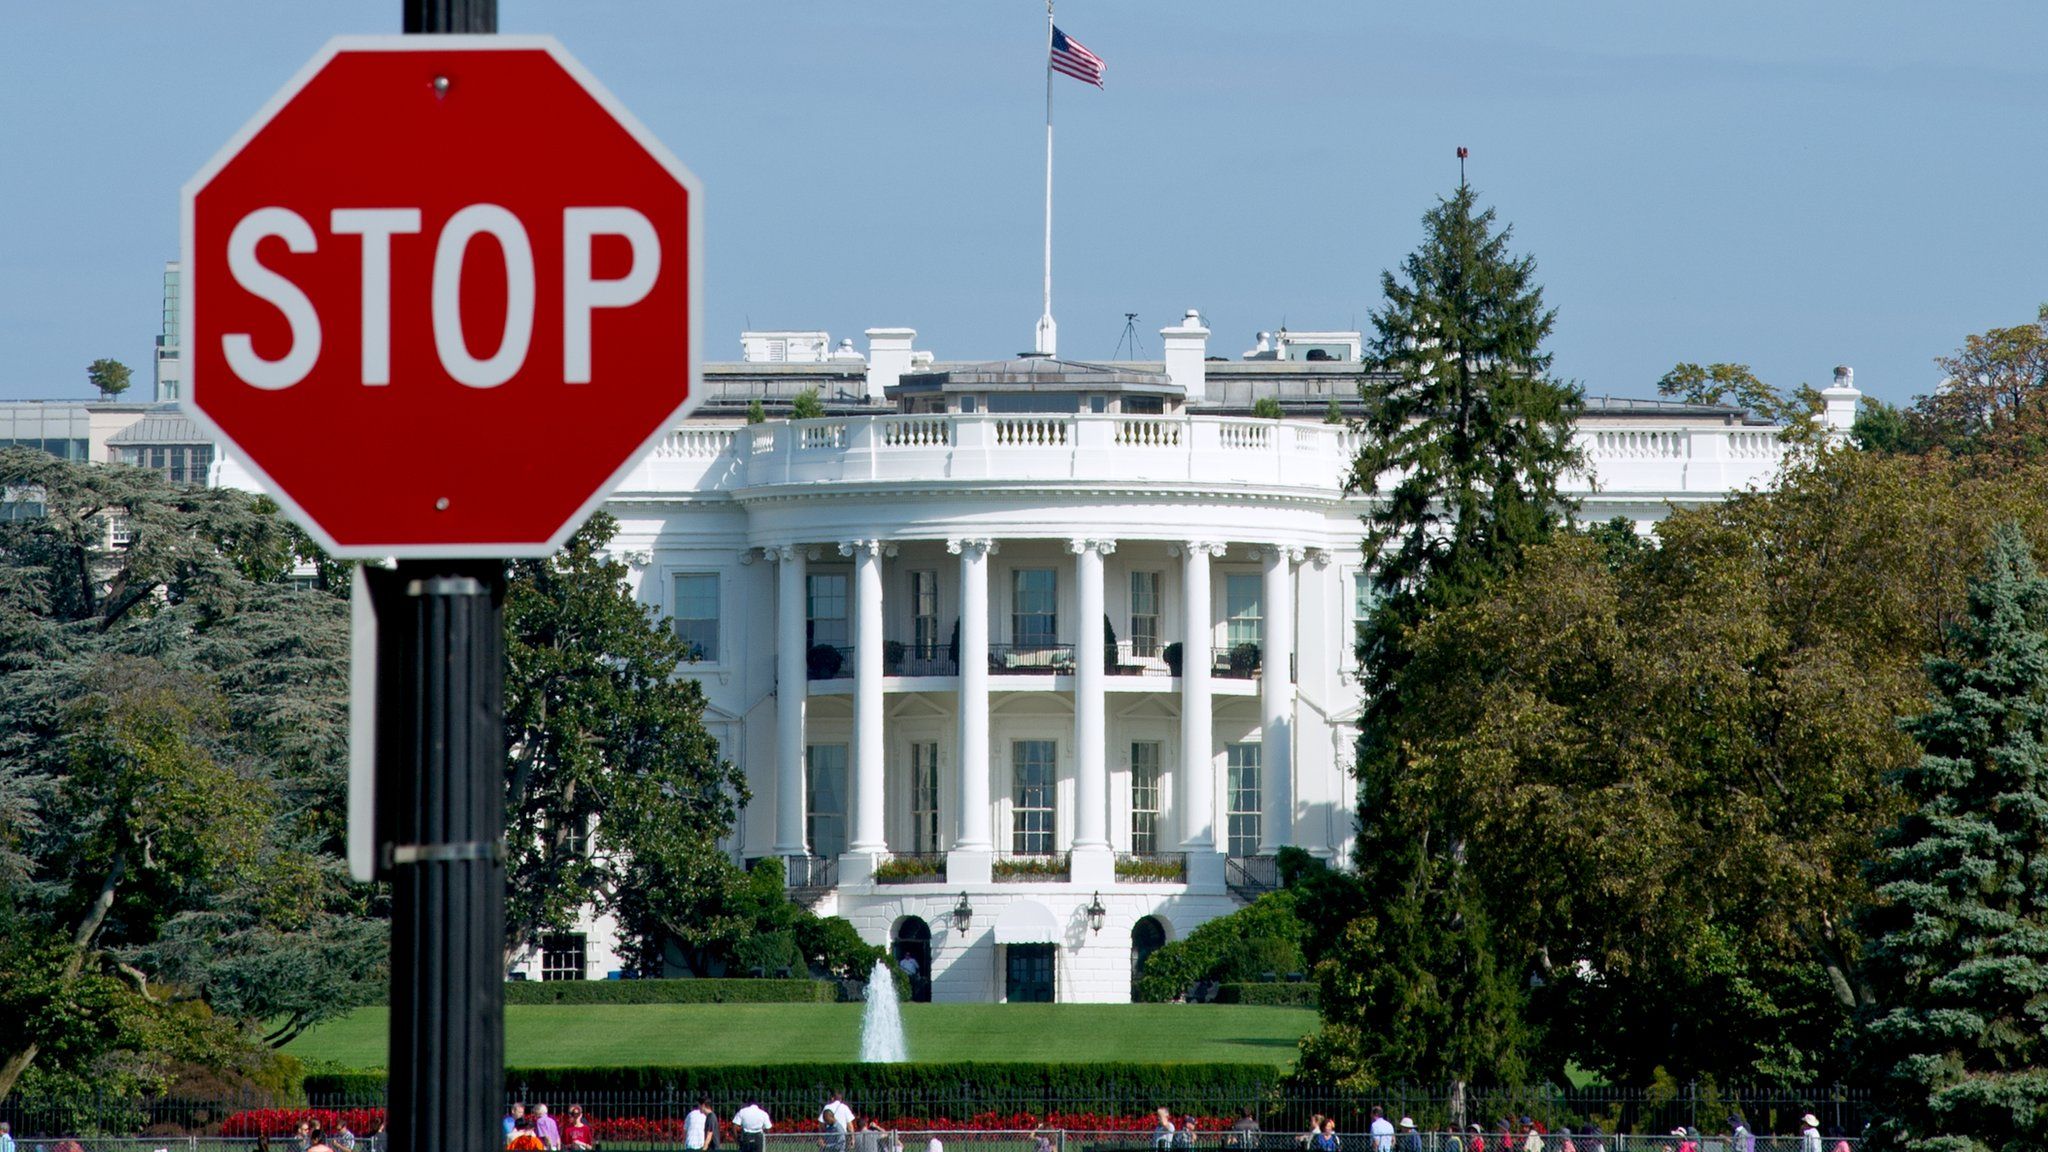 The White House is seen behind a stop sign in Washington, DC, on October 1, 2013.